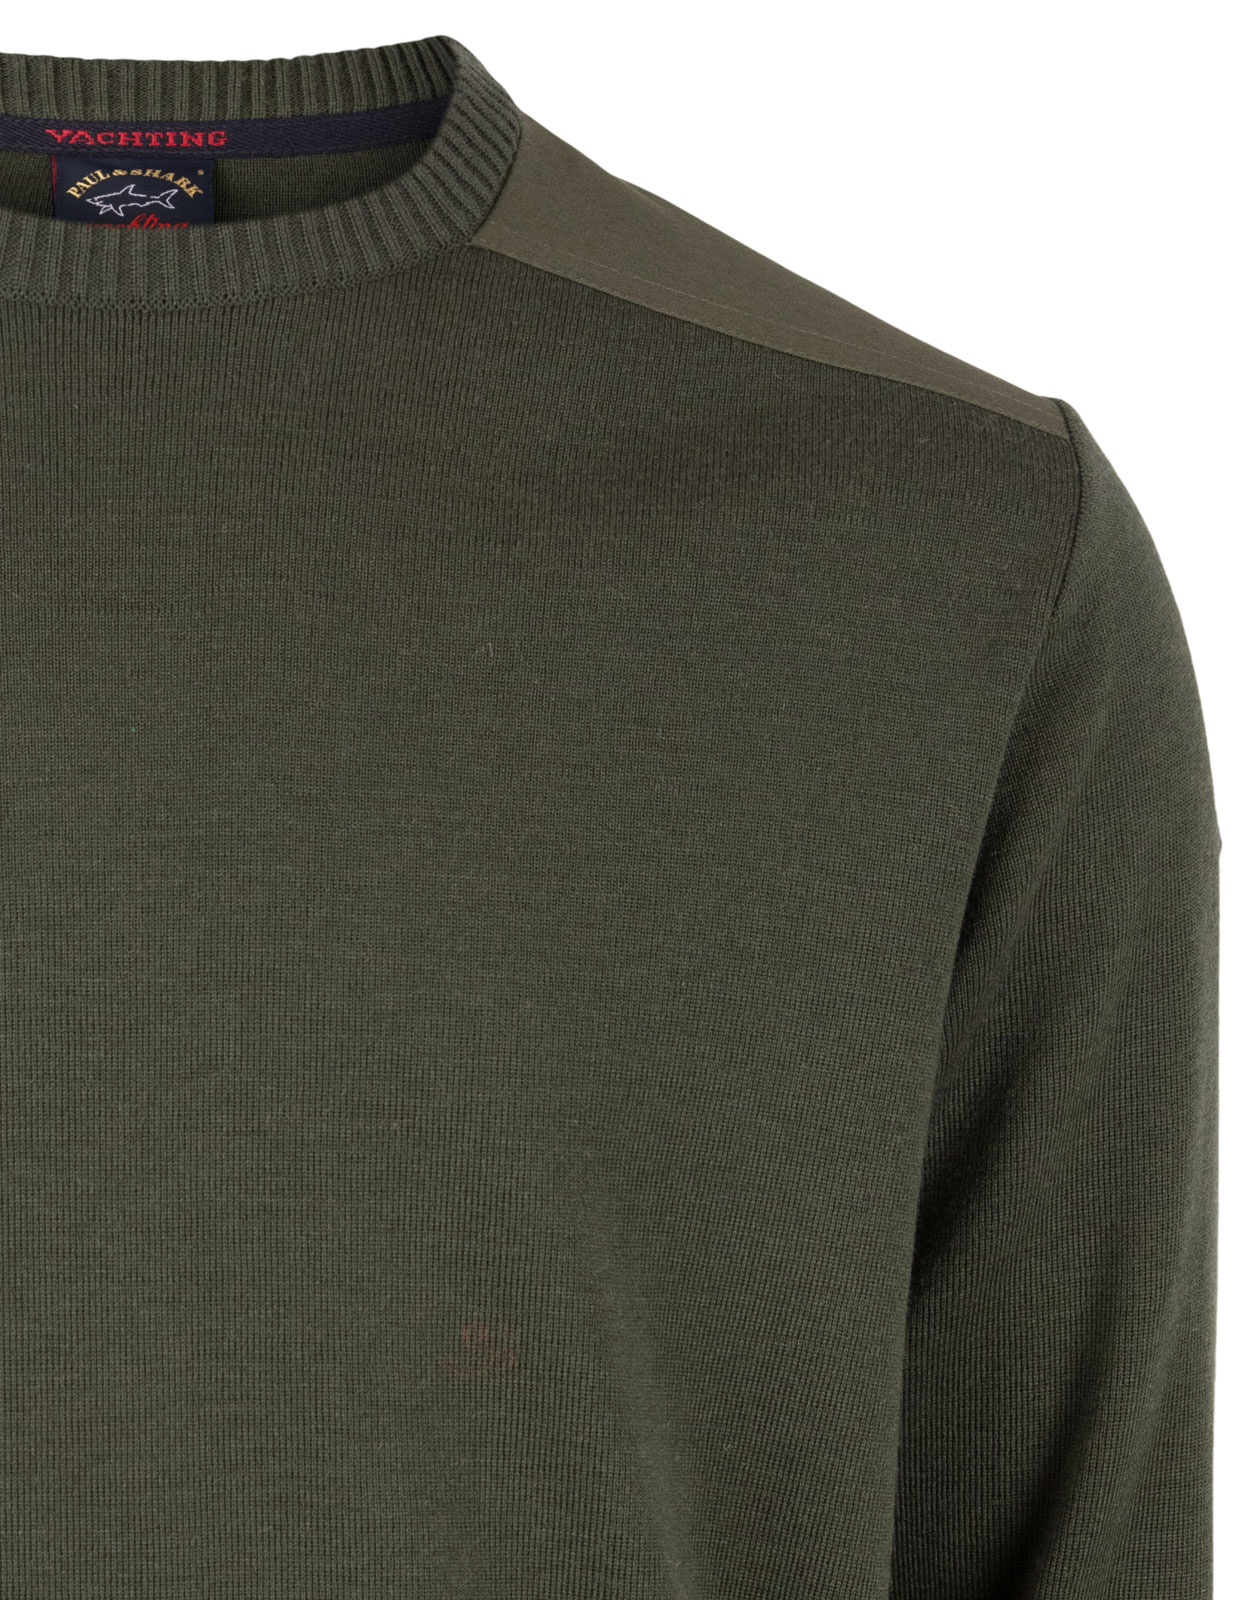 Yachting Wool Crewneck Sweater Olive Stl S